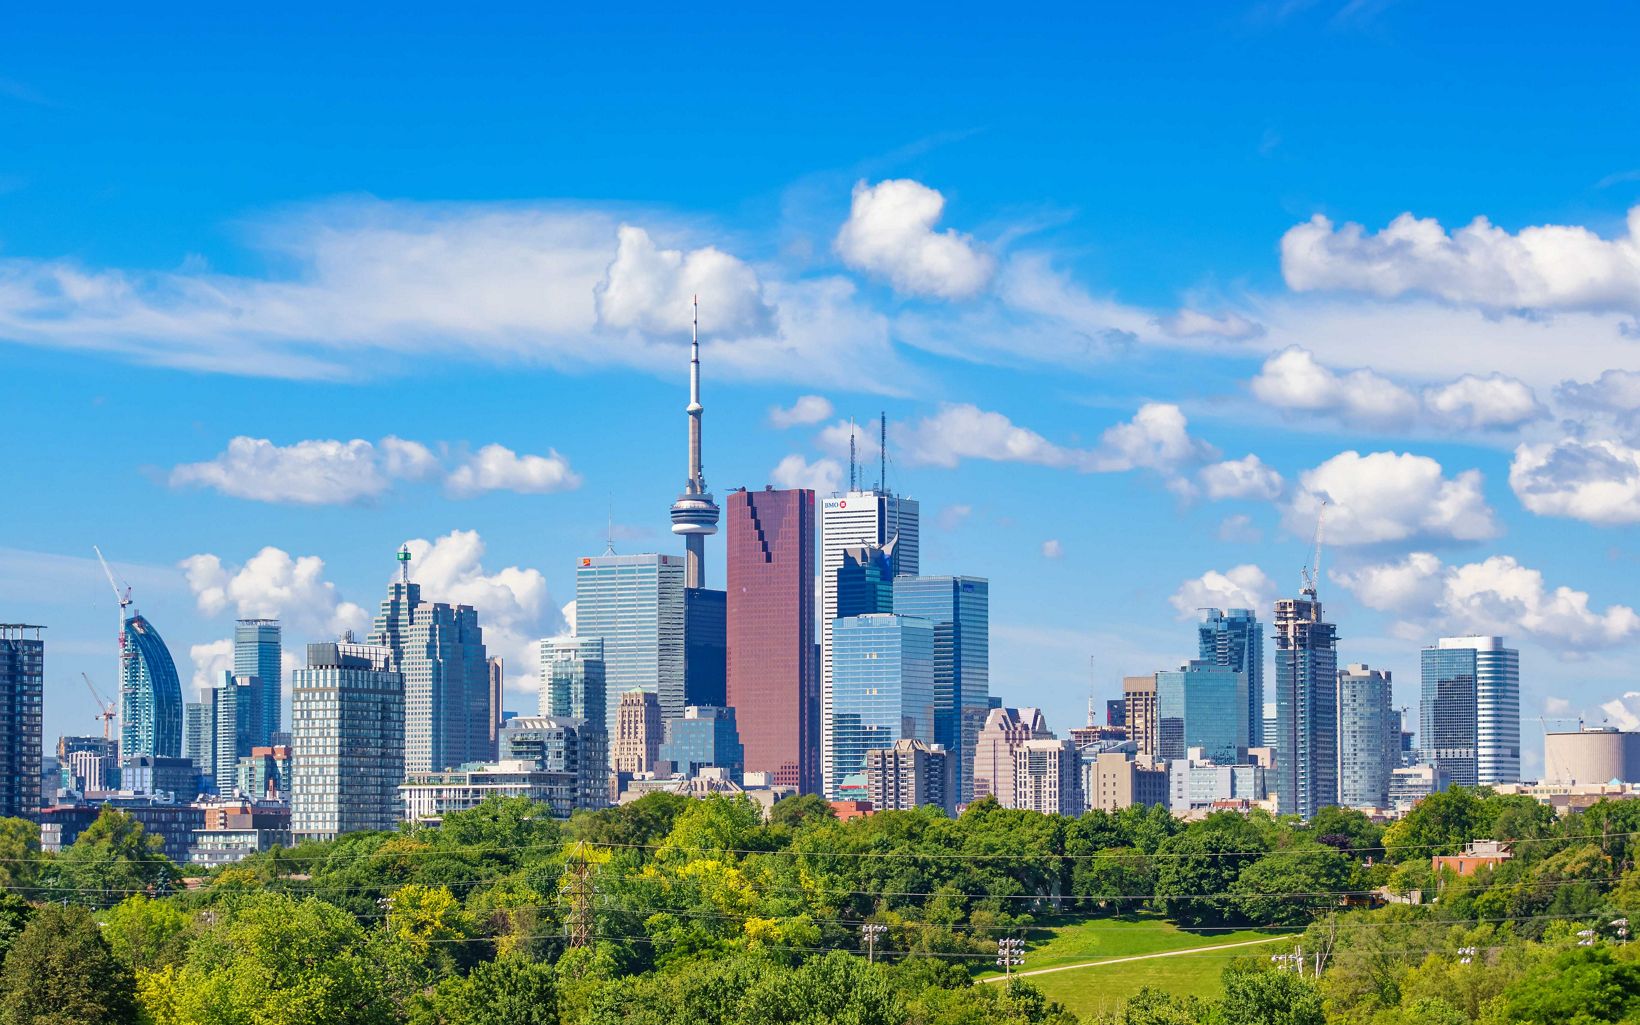 Toronto skyline with blue sky in the background and green trees in the forground